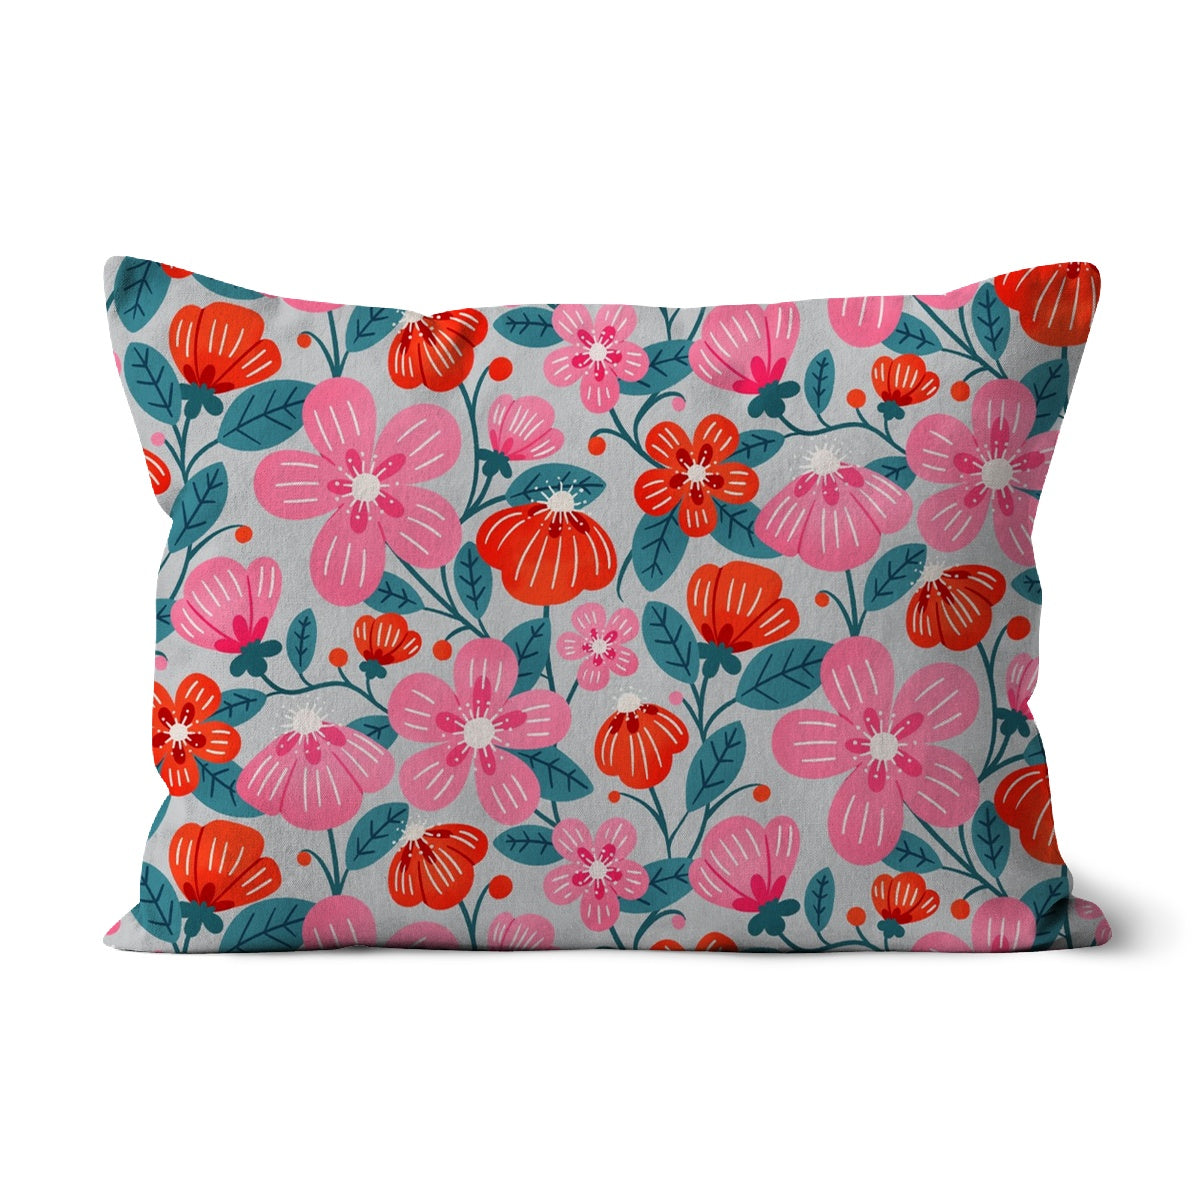 Pink and Red Buttercups Cushion